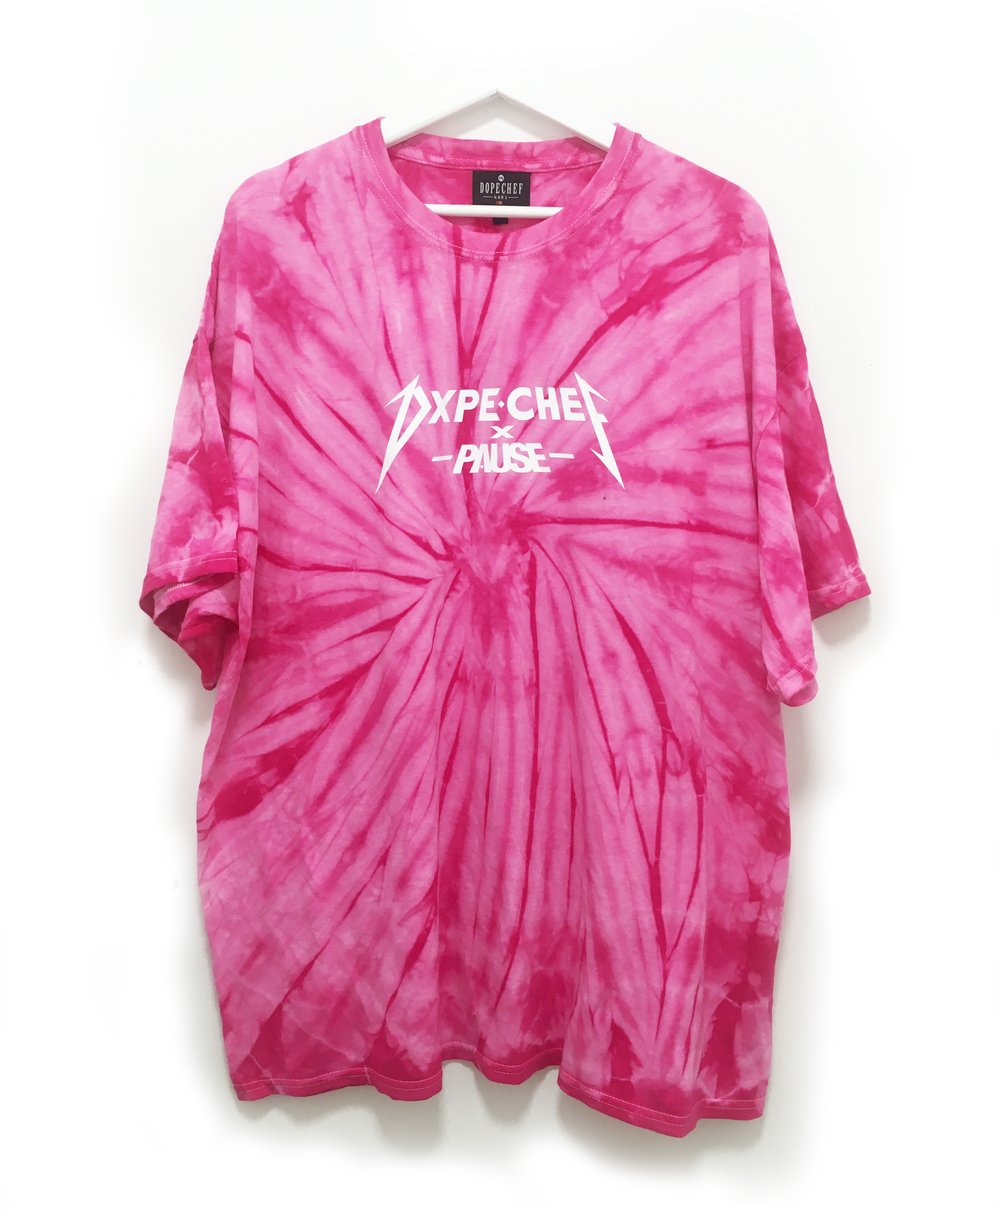 PAUSE x Dope Chef Pink Vortex Collab Launches